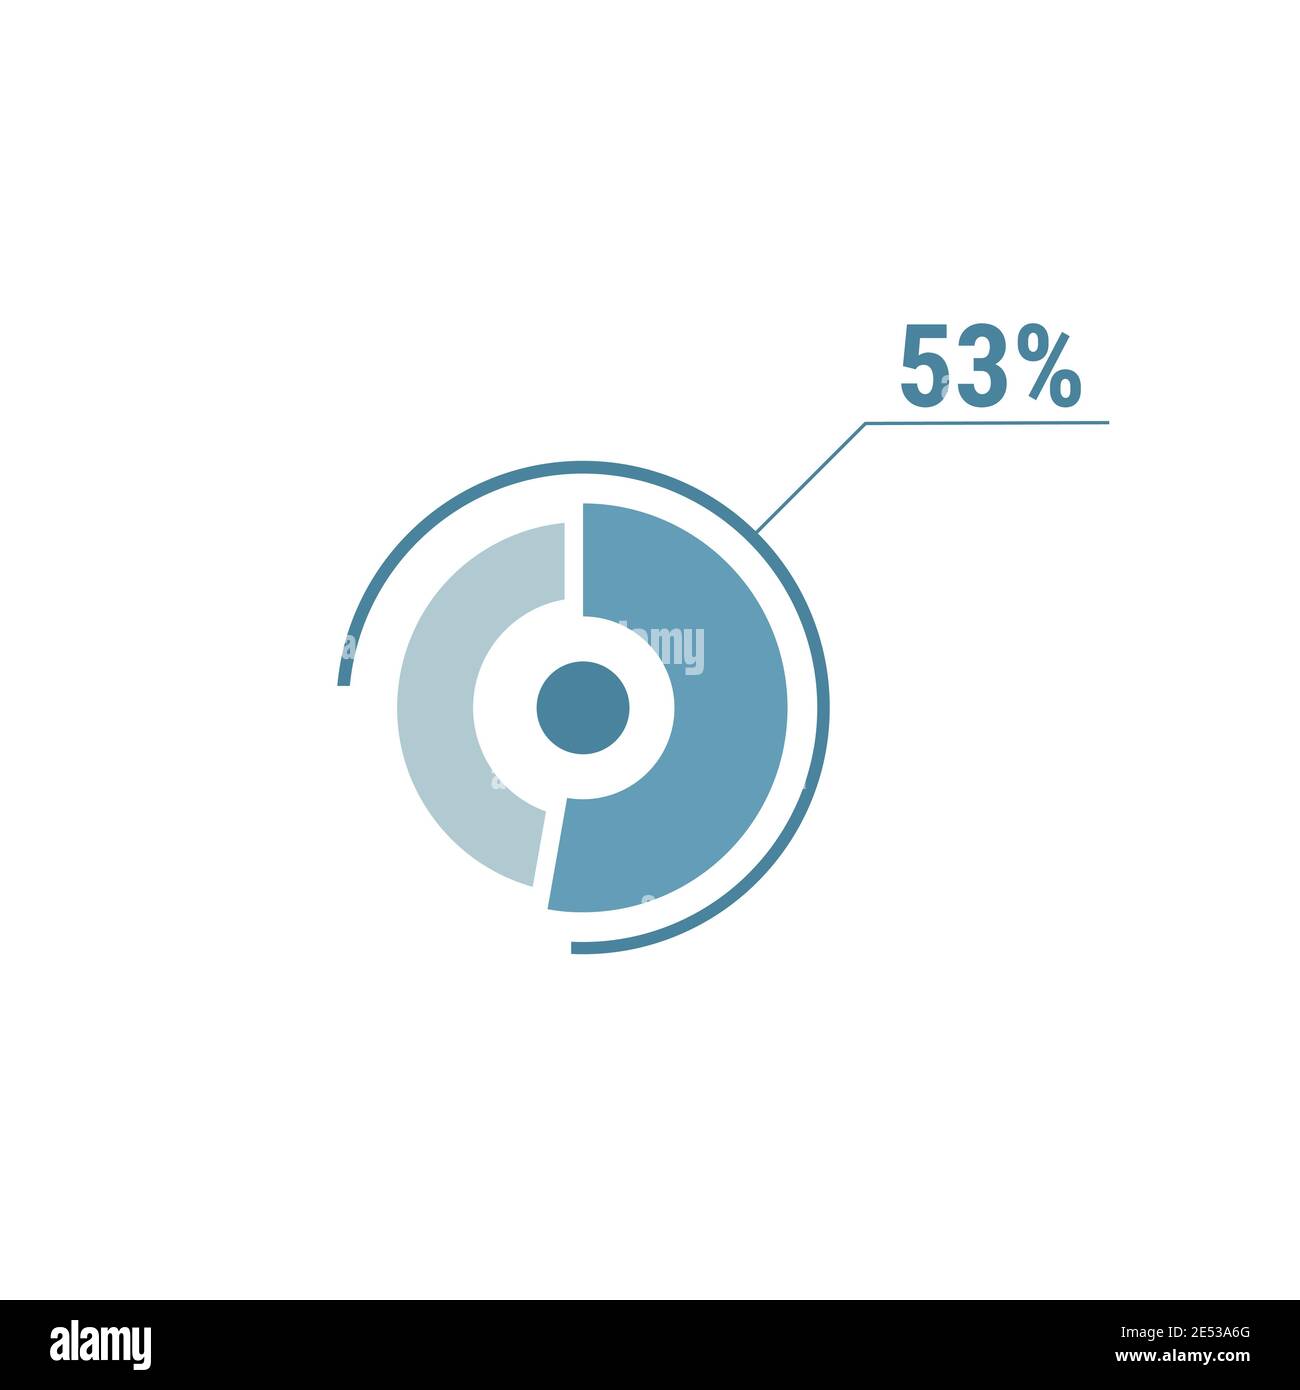 Circle diagram fifty three percent pie chart 53. Circle percentage vector diagram. Flat vector illustration for web UI design, blue on white backgroun Stock Vector